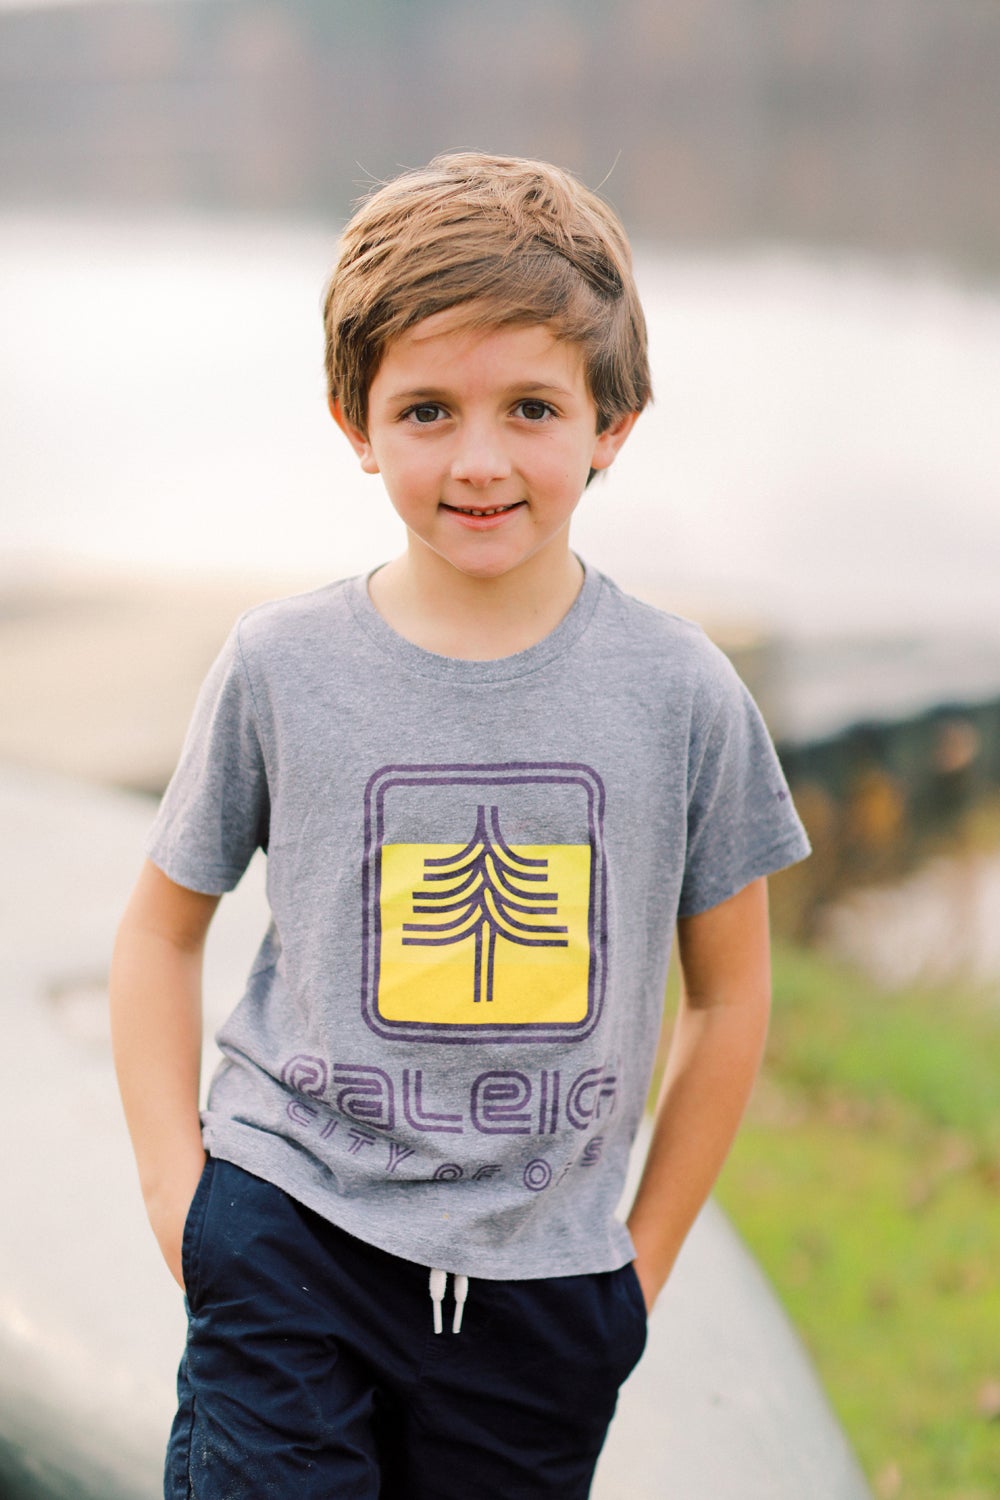 Raleigh - City of Oaks - Youth Short Sleeve T-Shirt